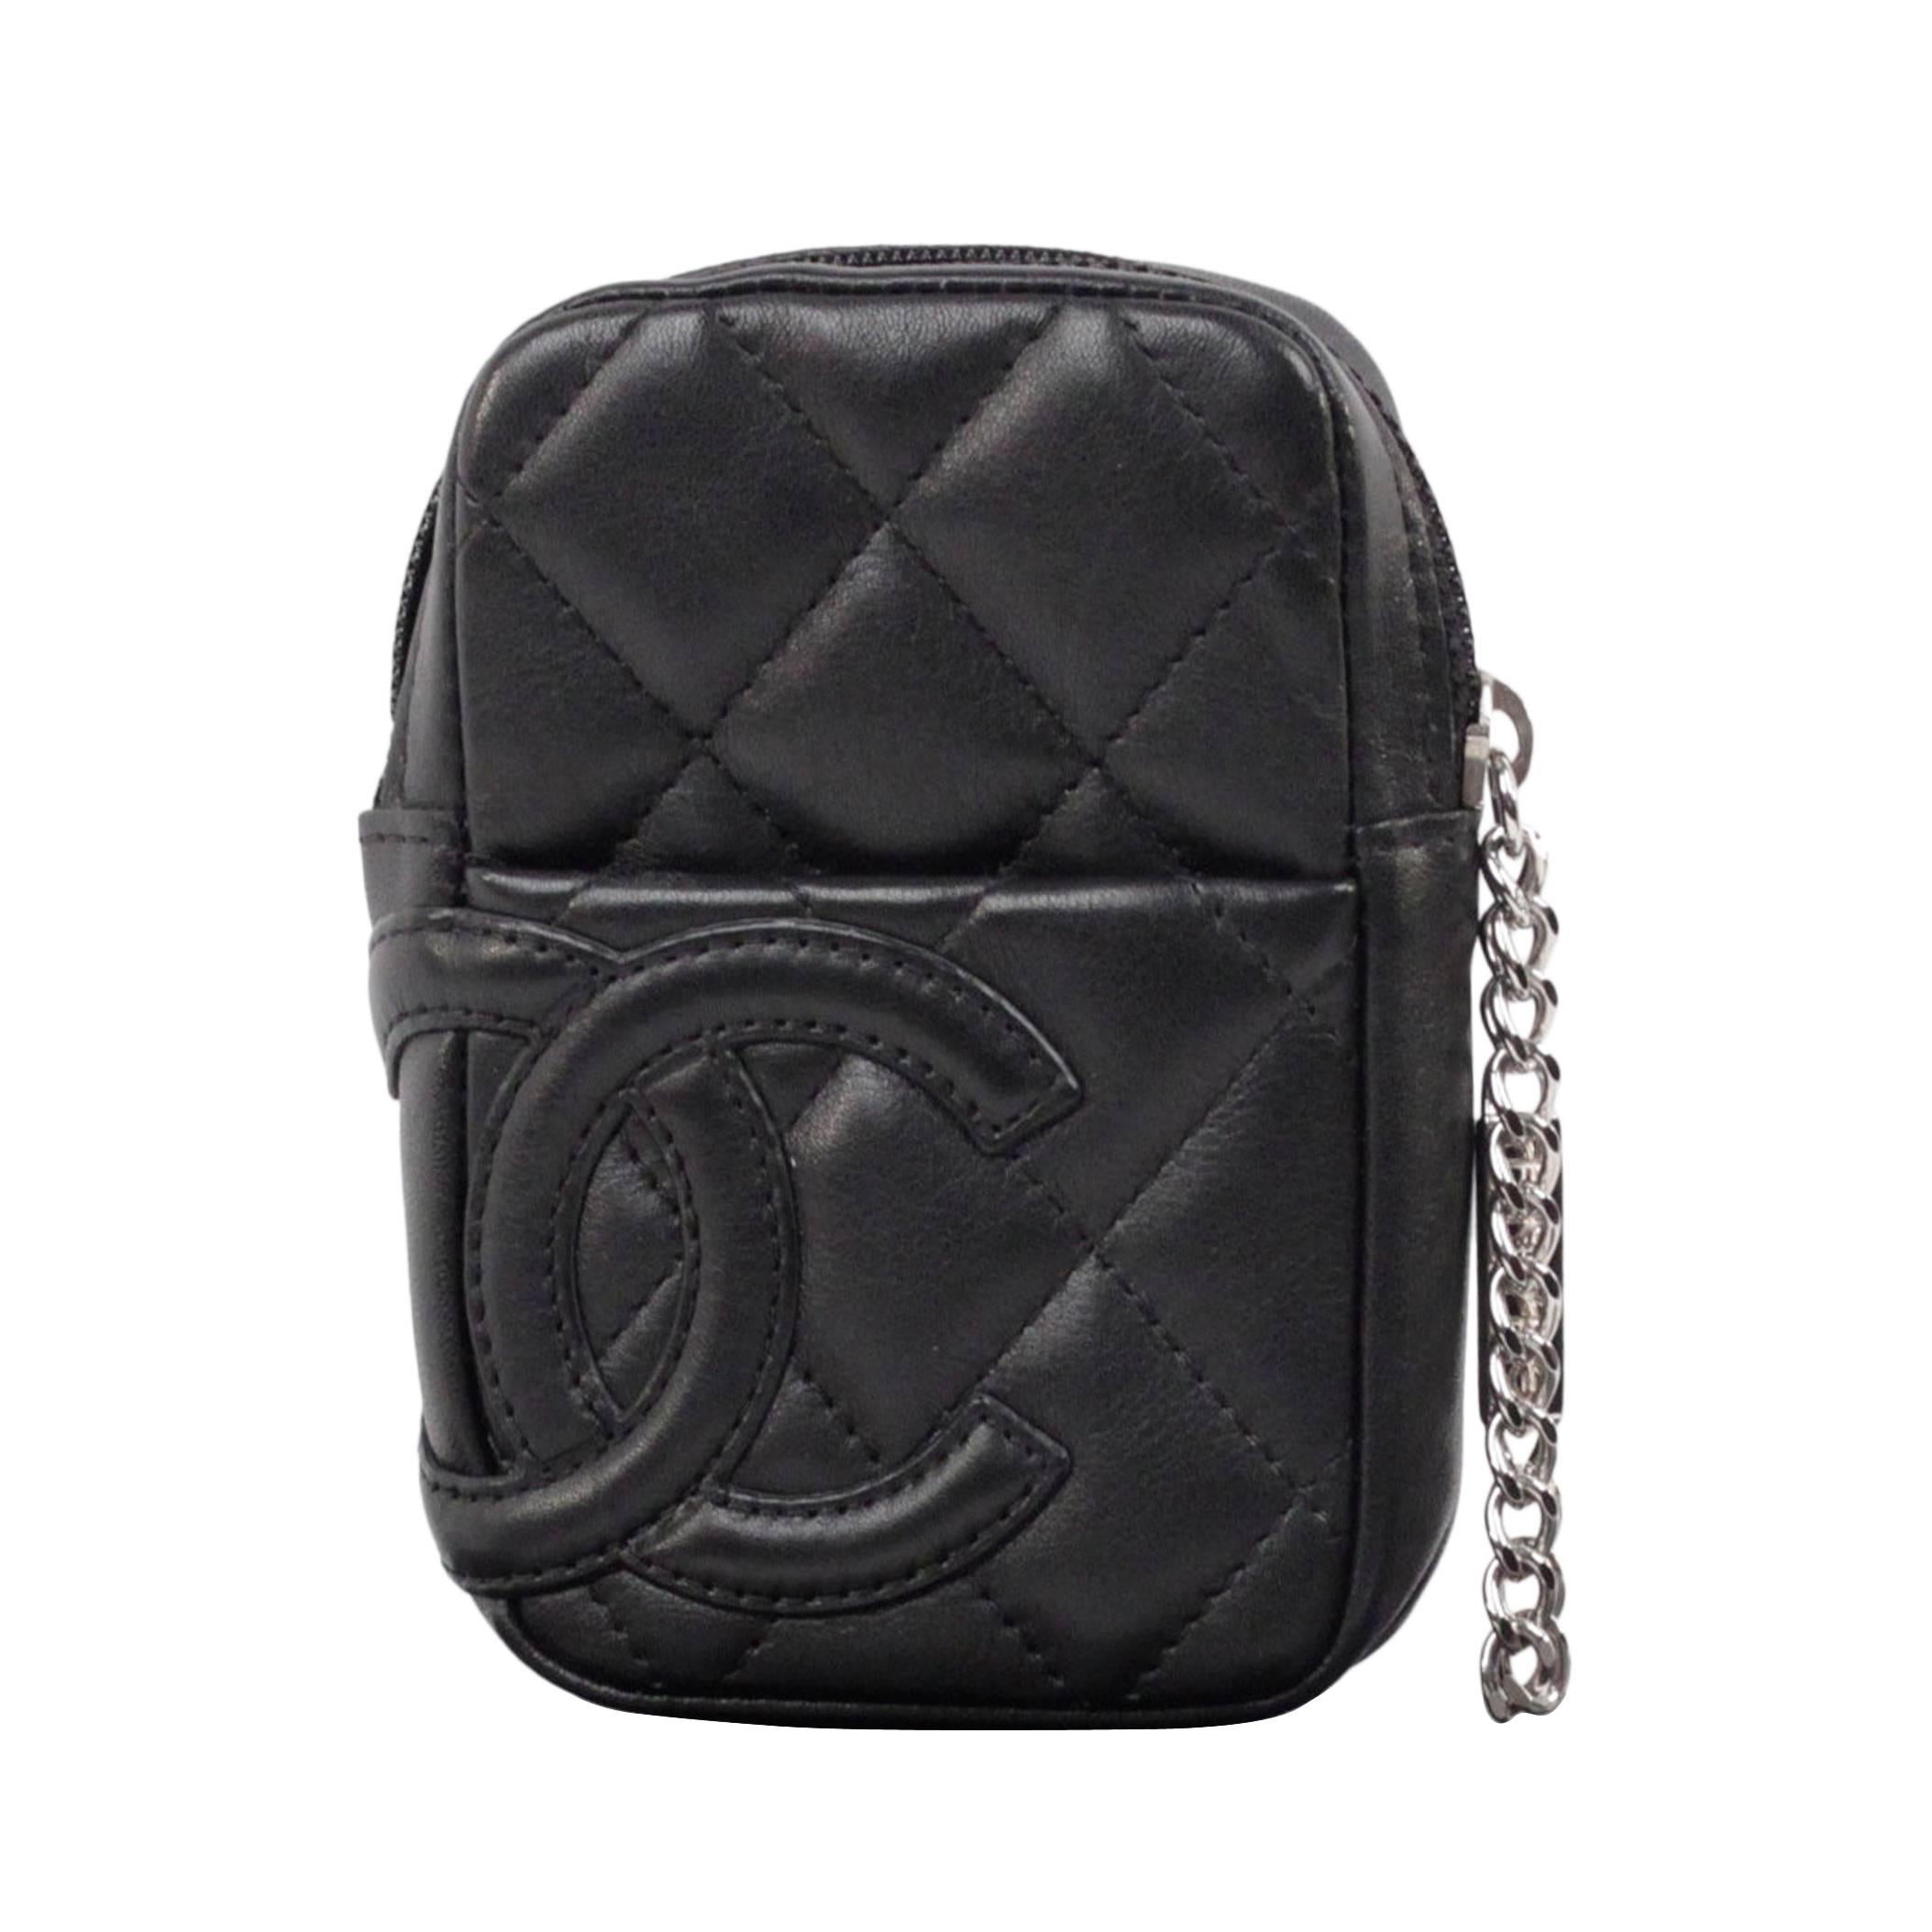 CHANEL Cambon Black QUILTED Leather CIGARETTE CASE Holder Zip POUCH